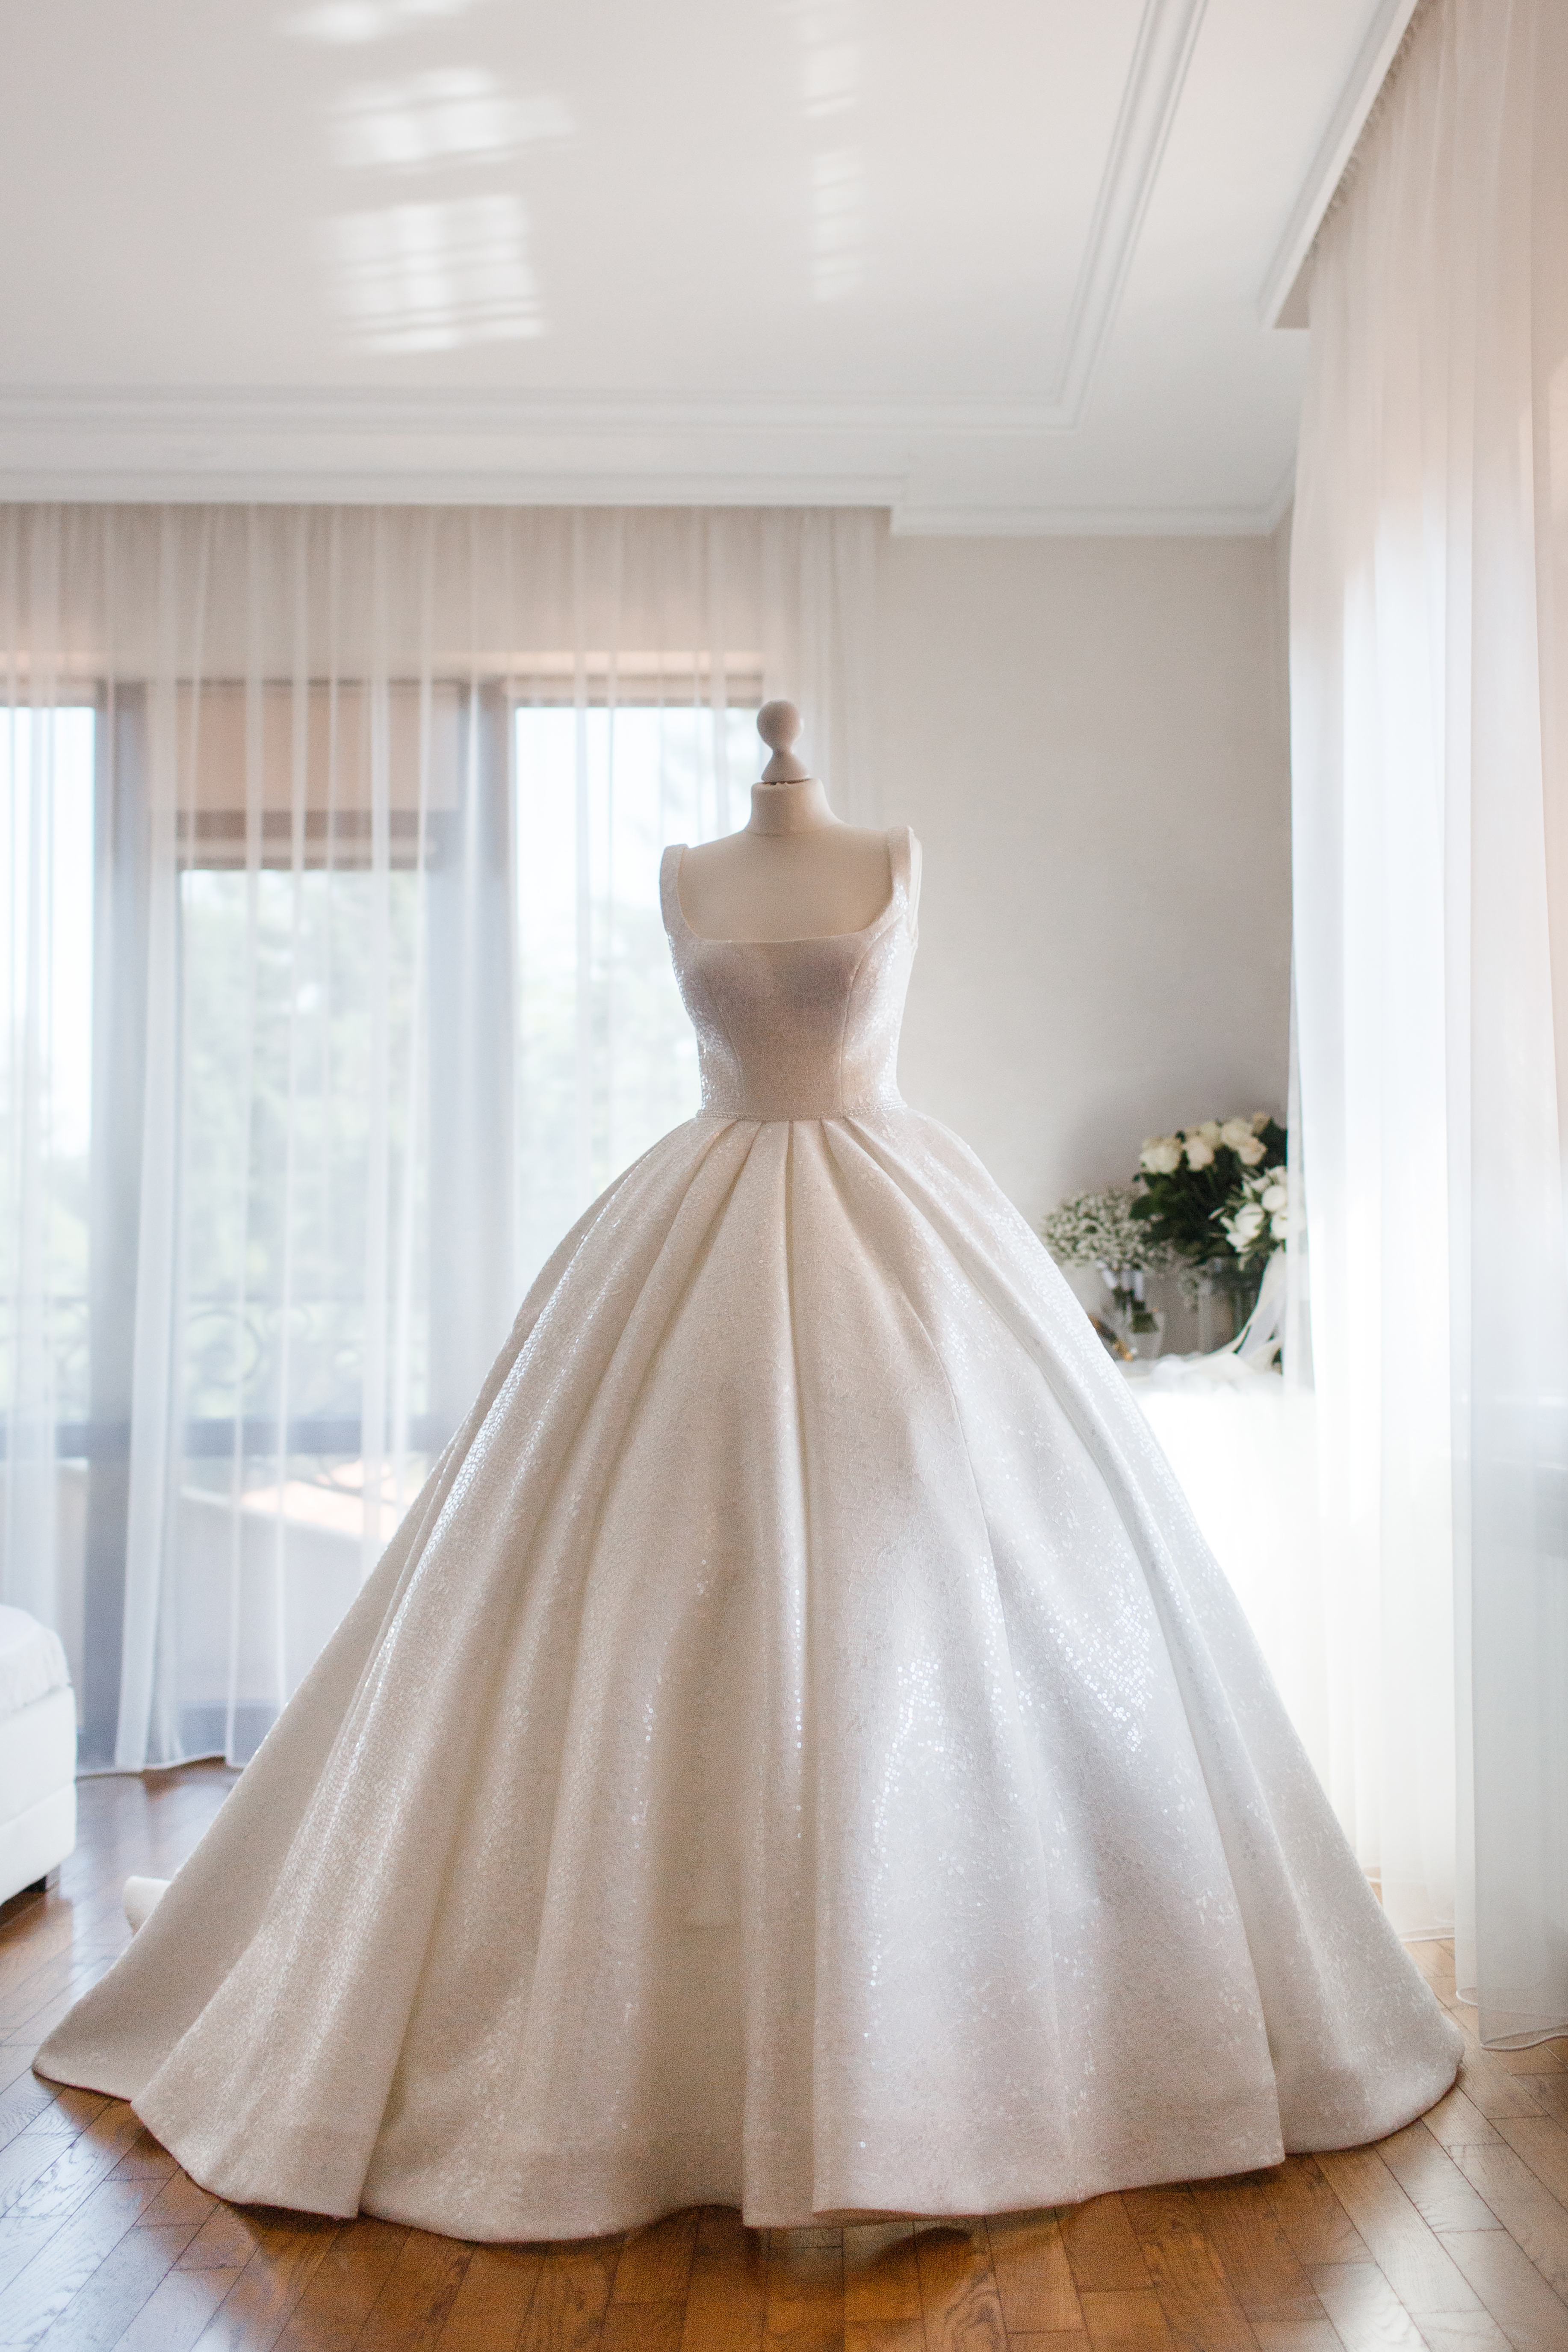 A wedding dress on a mannequin in a store | Source: Getty Images